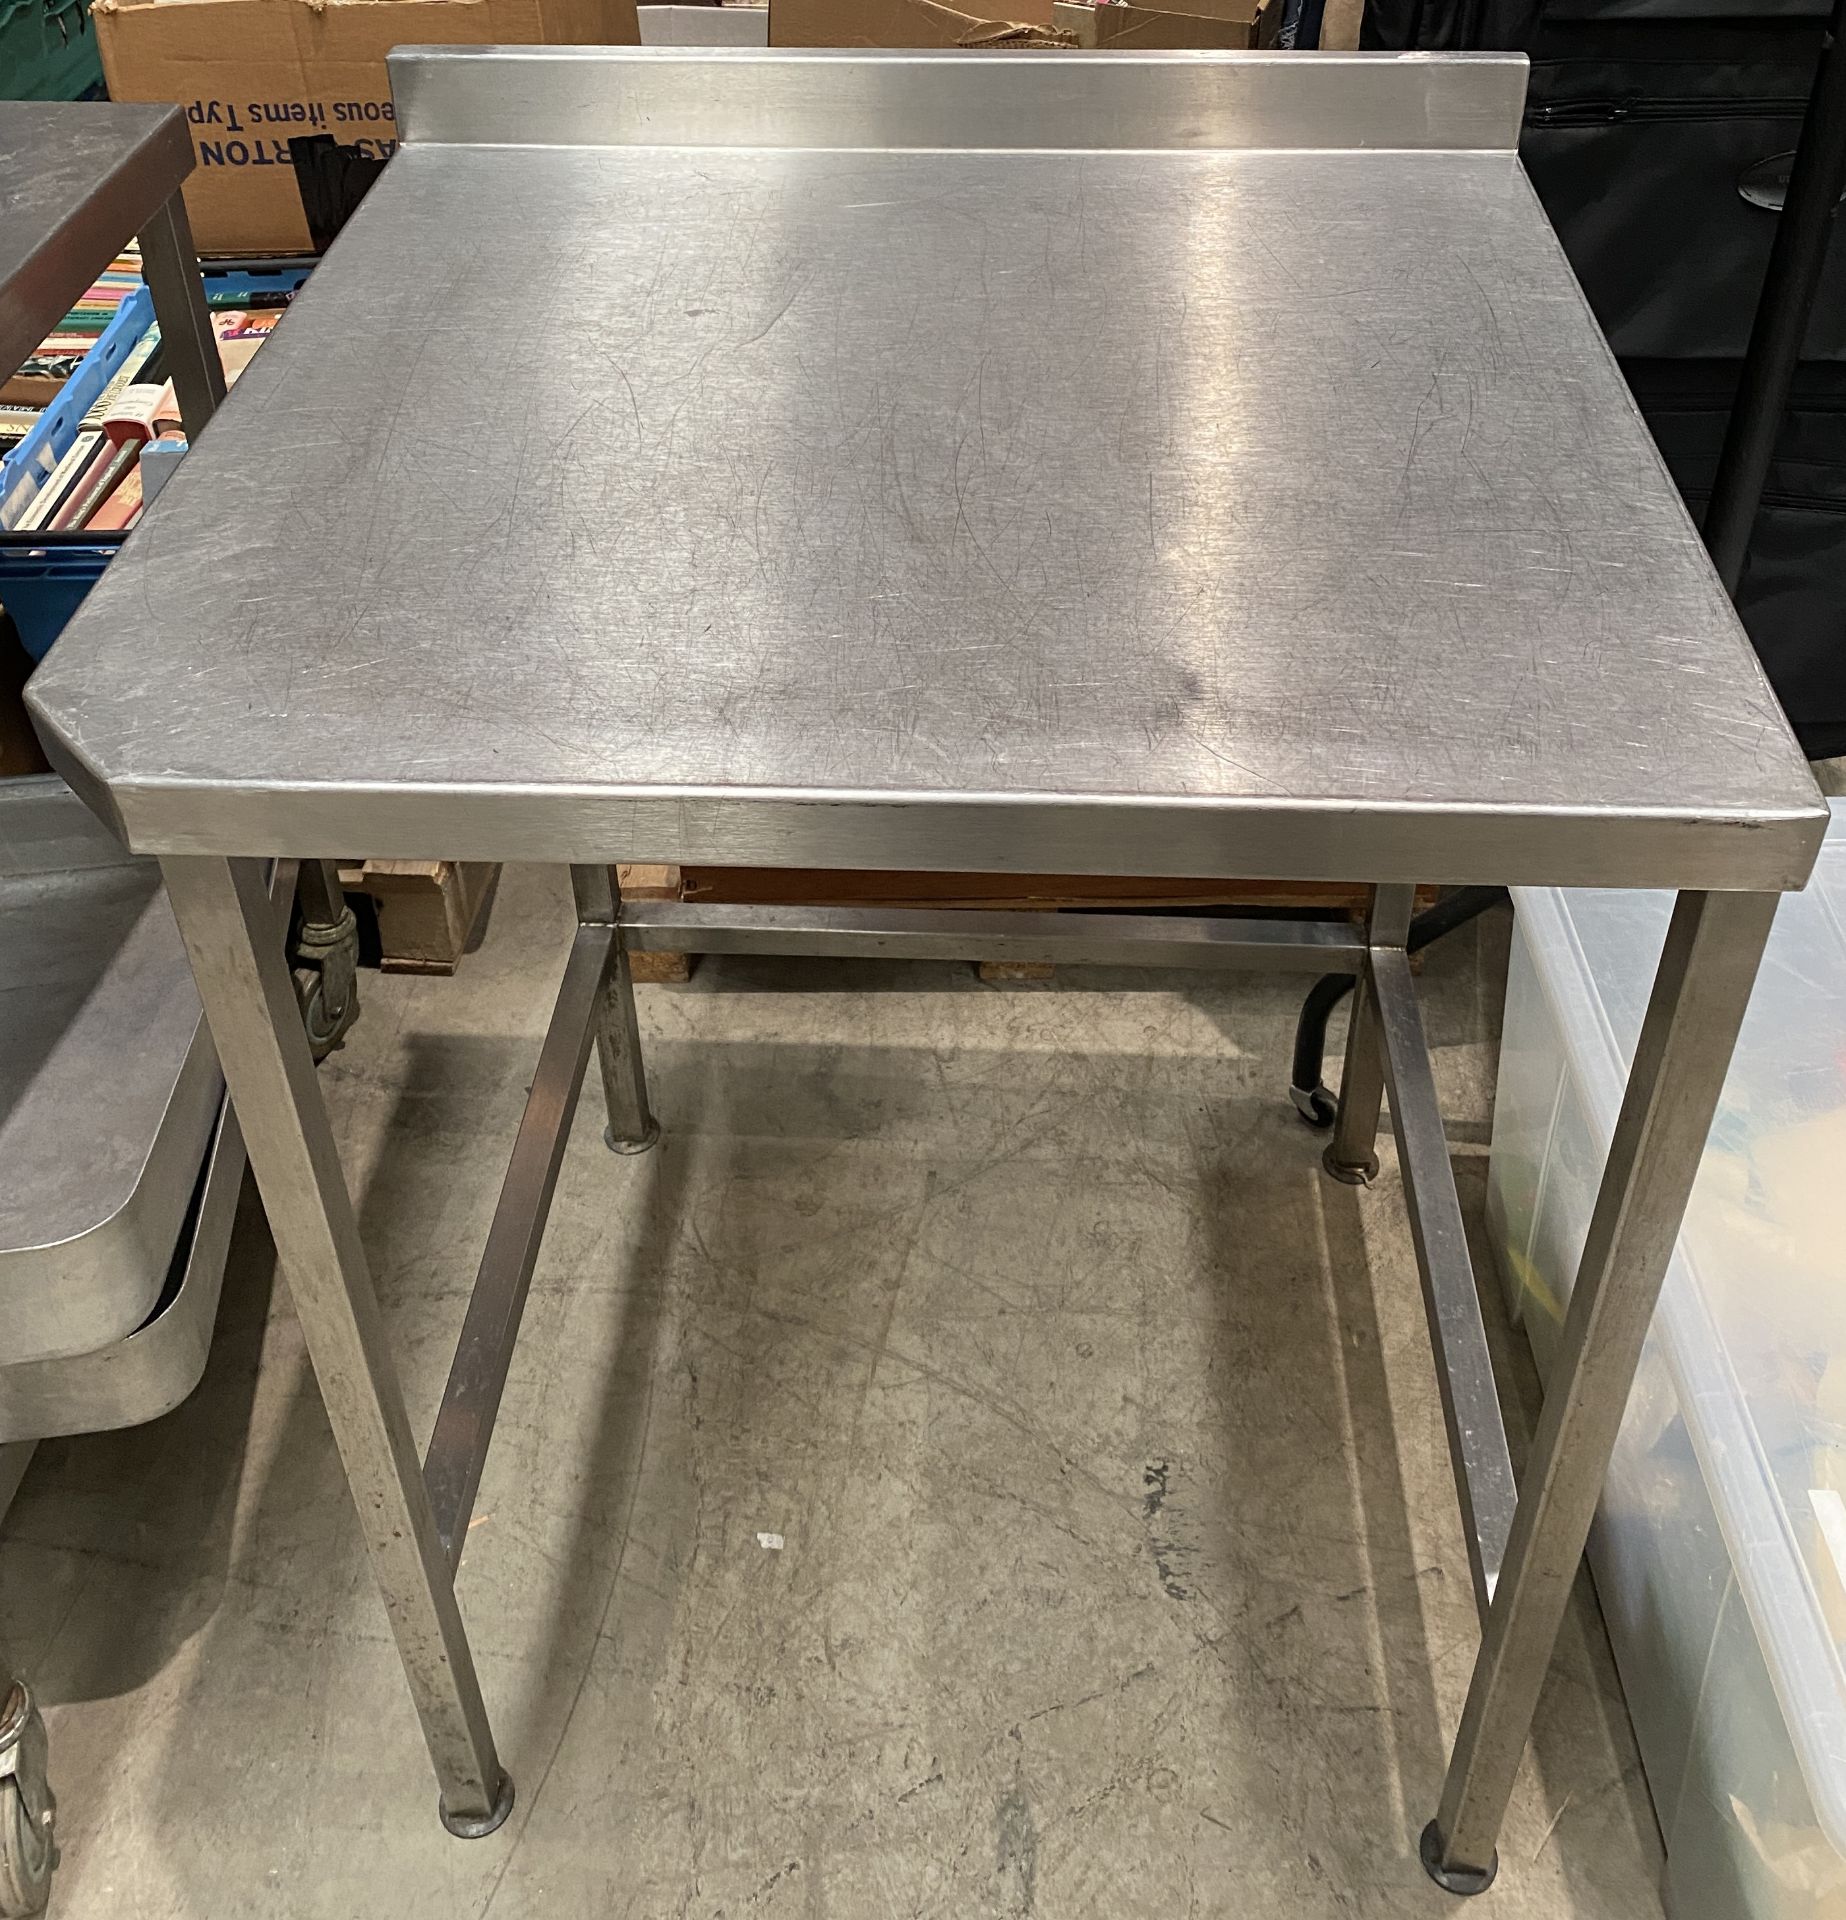 Stainless Steel Preparation Table - 70cm x 75cm